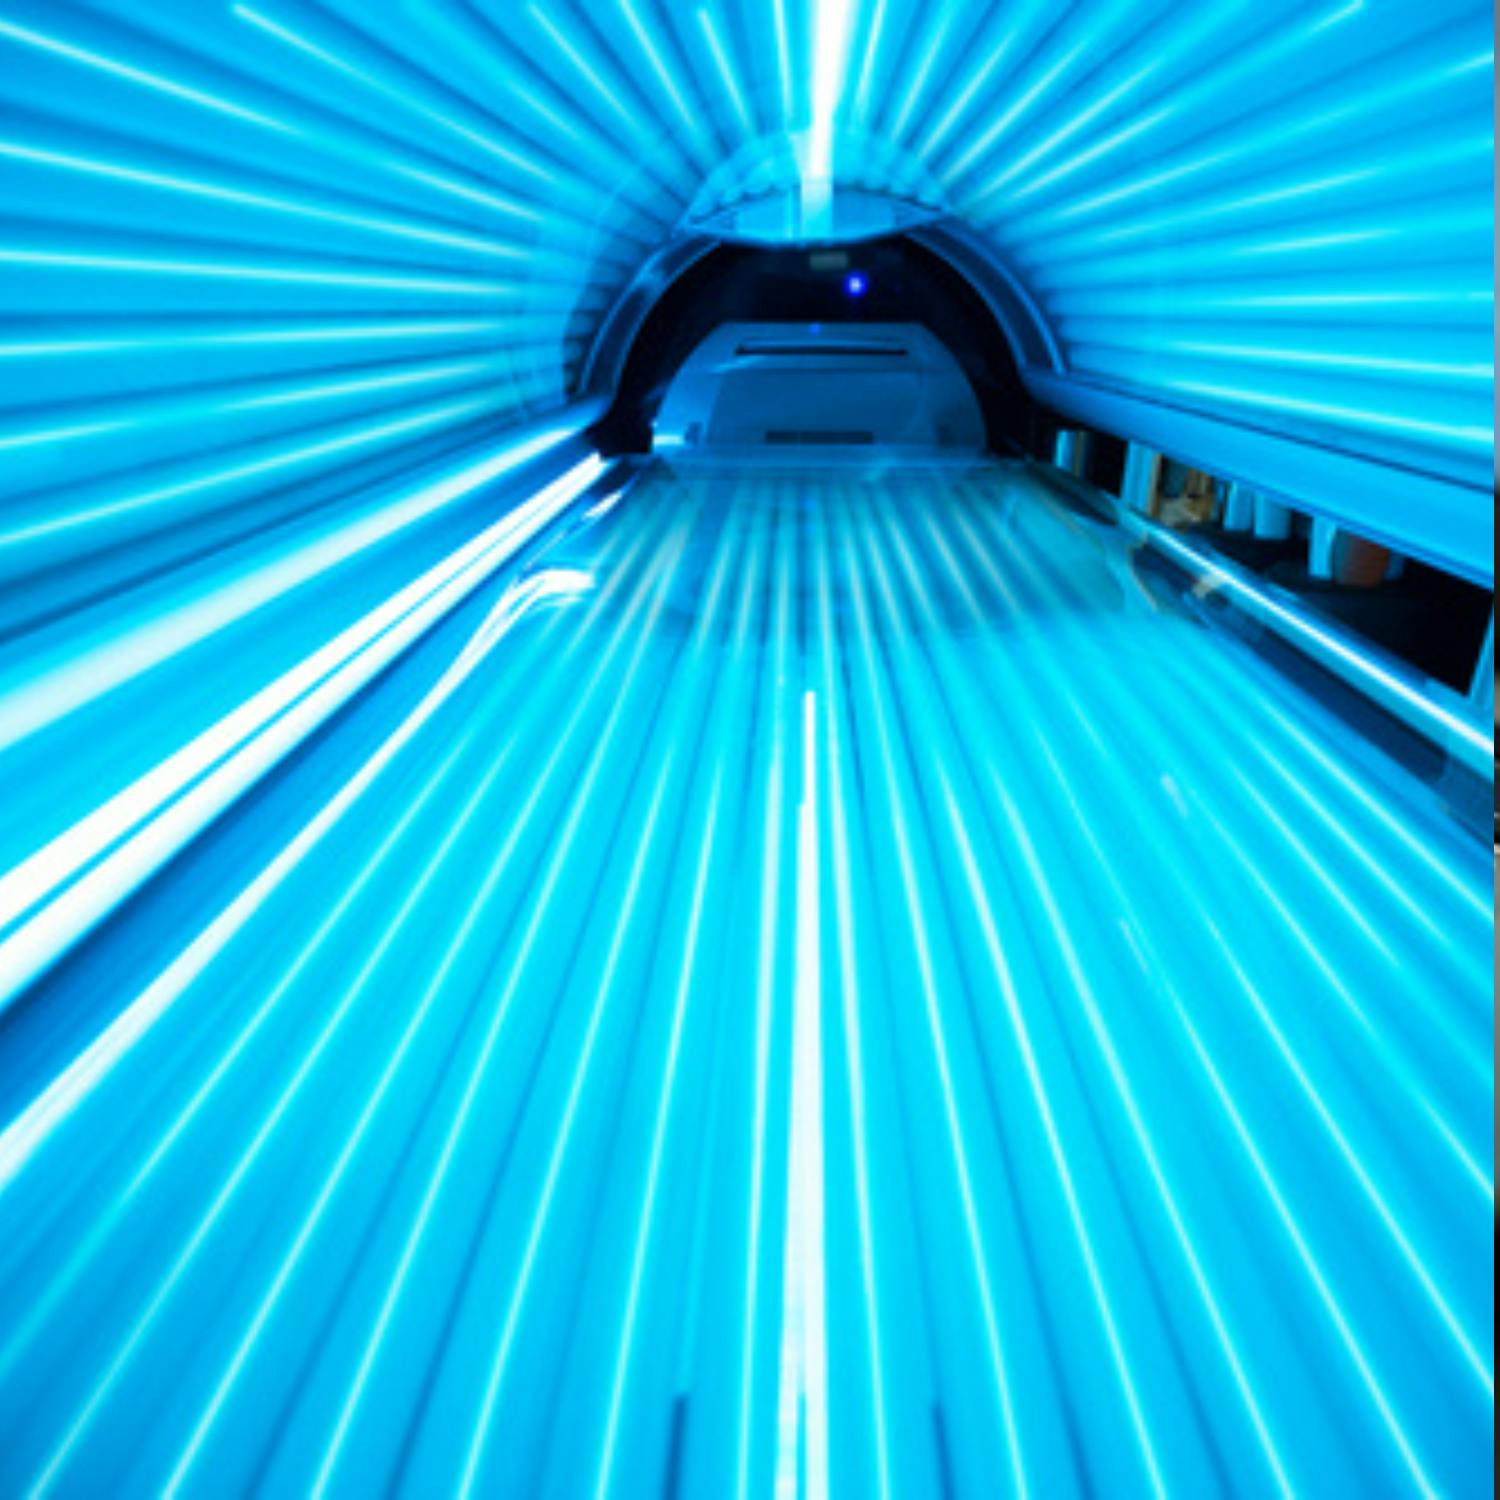 Sunbeds can drastically increase the risk of skin cancer